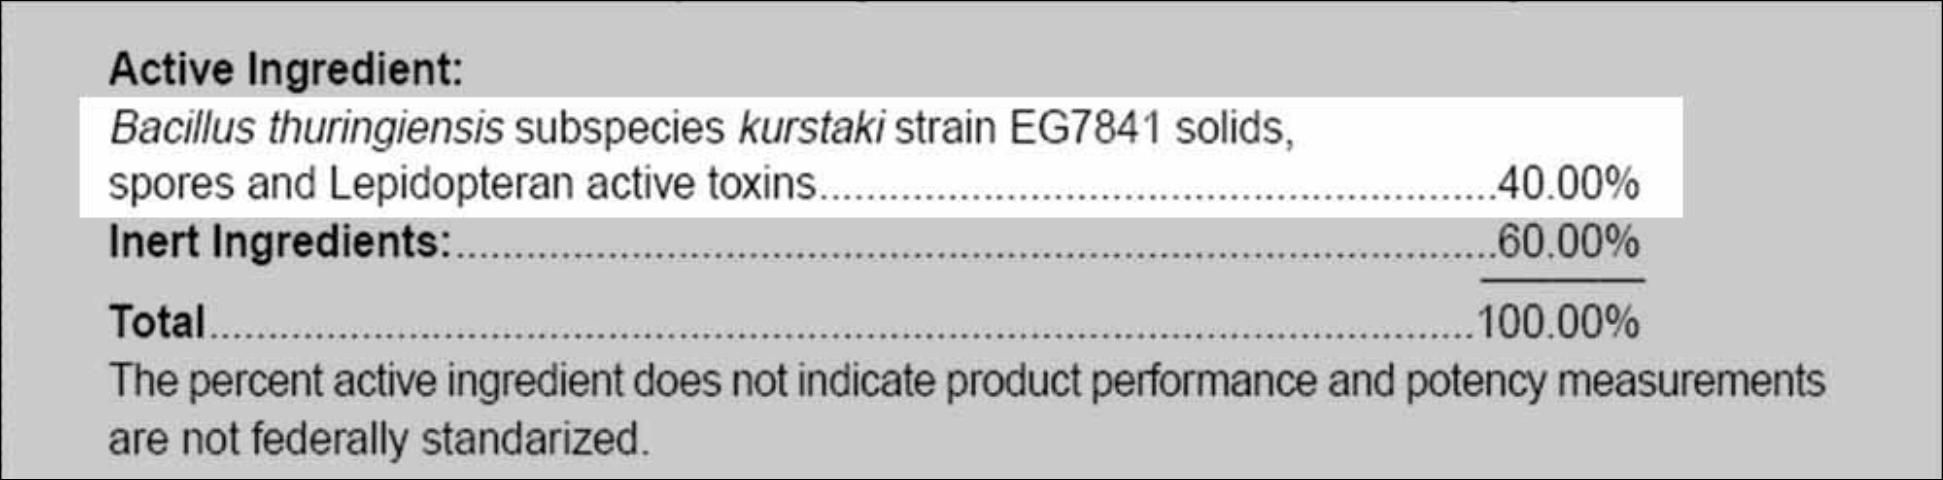 Figure 2. Ingredients statement for a product containing a microbial agent.